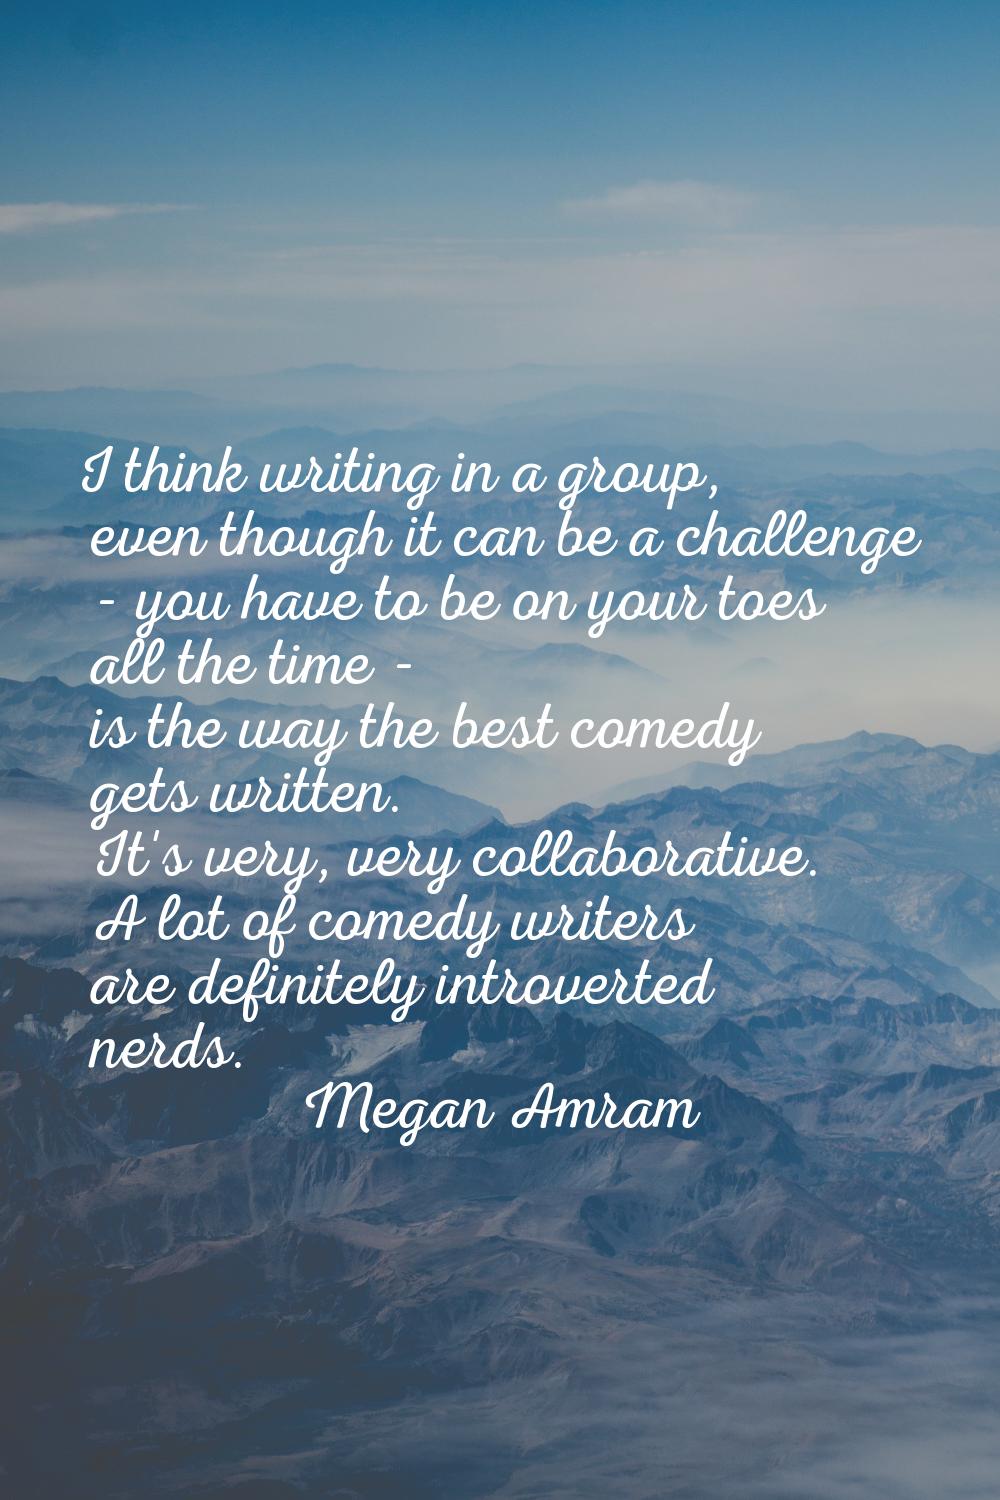 I think writing in a group, even though it can be a challenge - you have to be on your toes all the